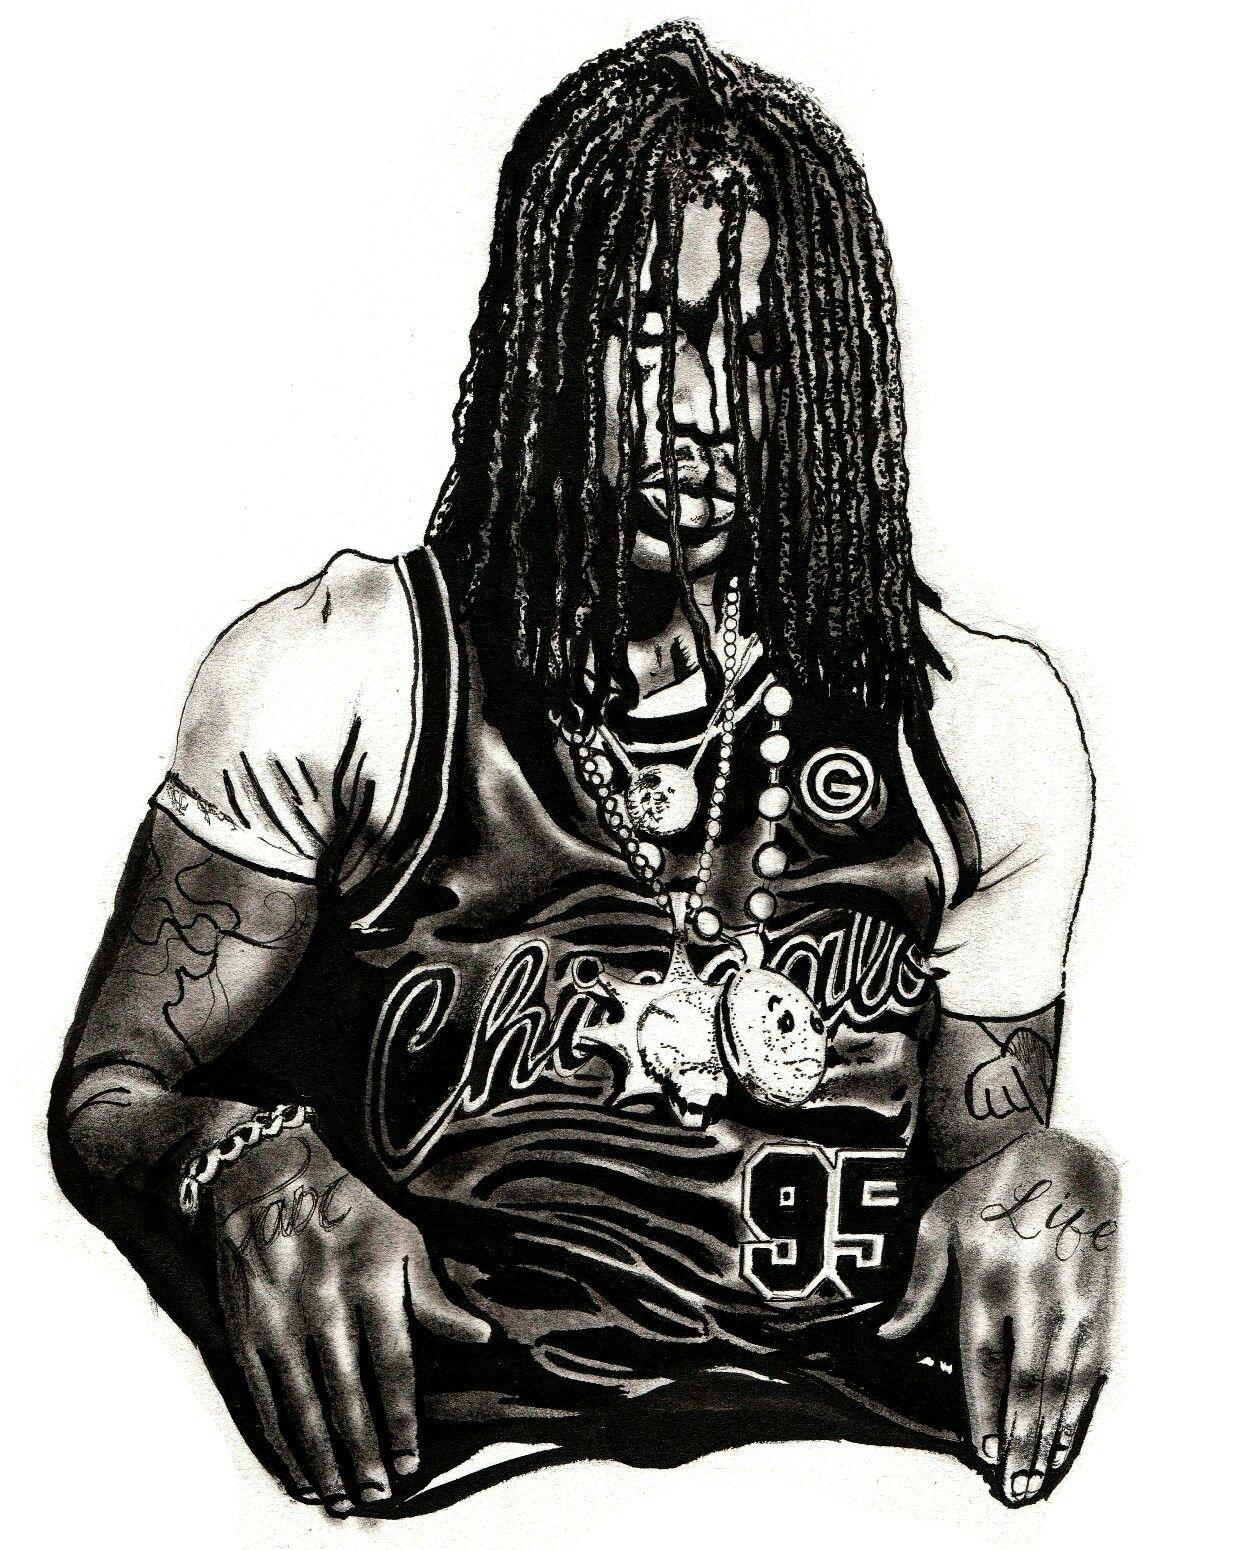 Cheif Keef IG. Chief keef wallpaper